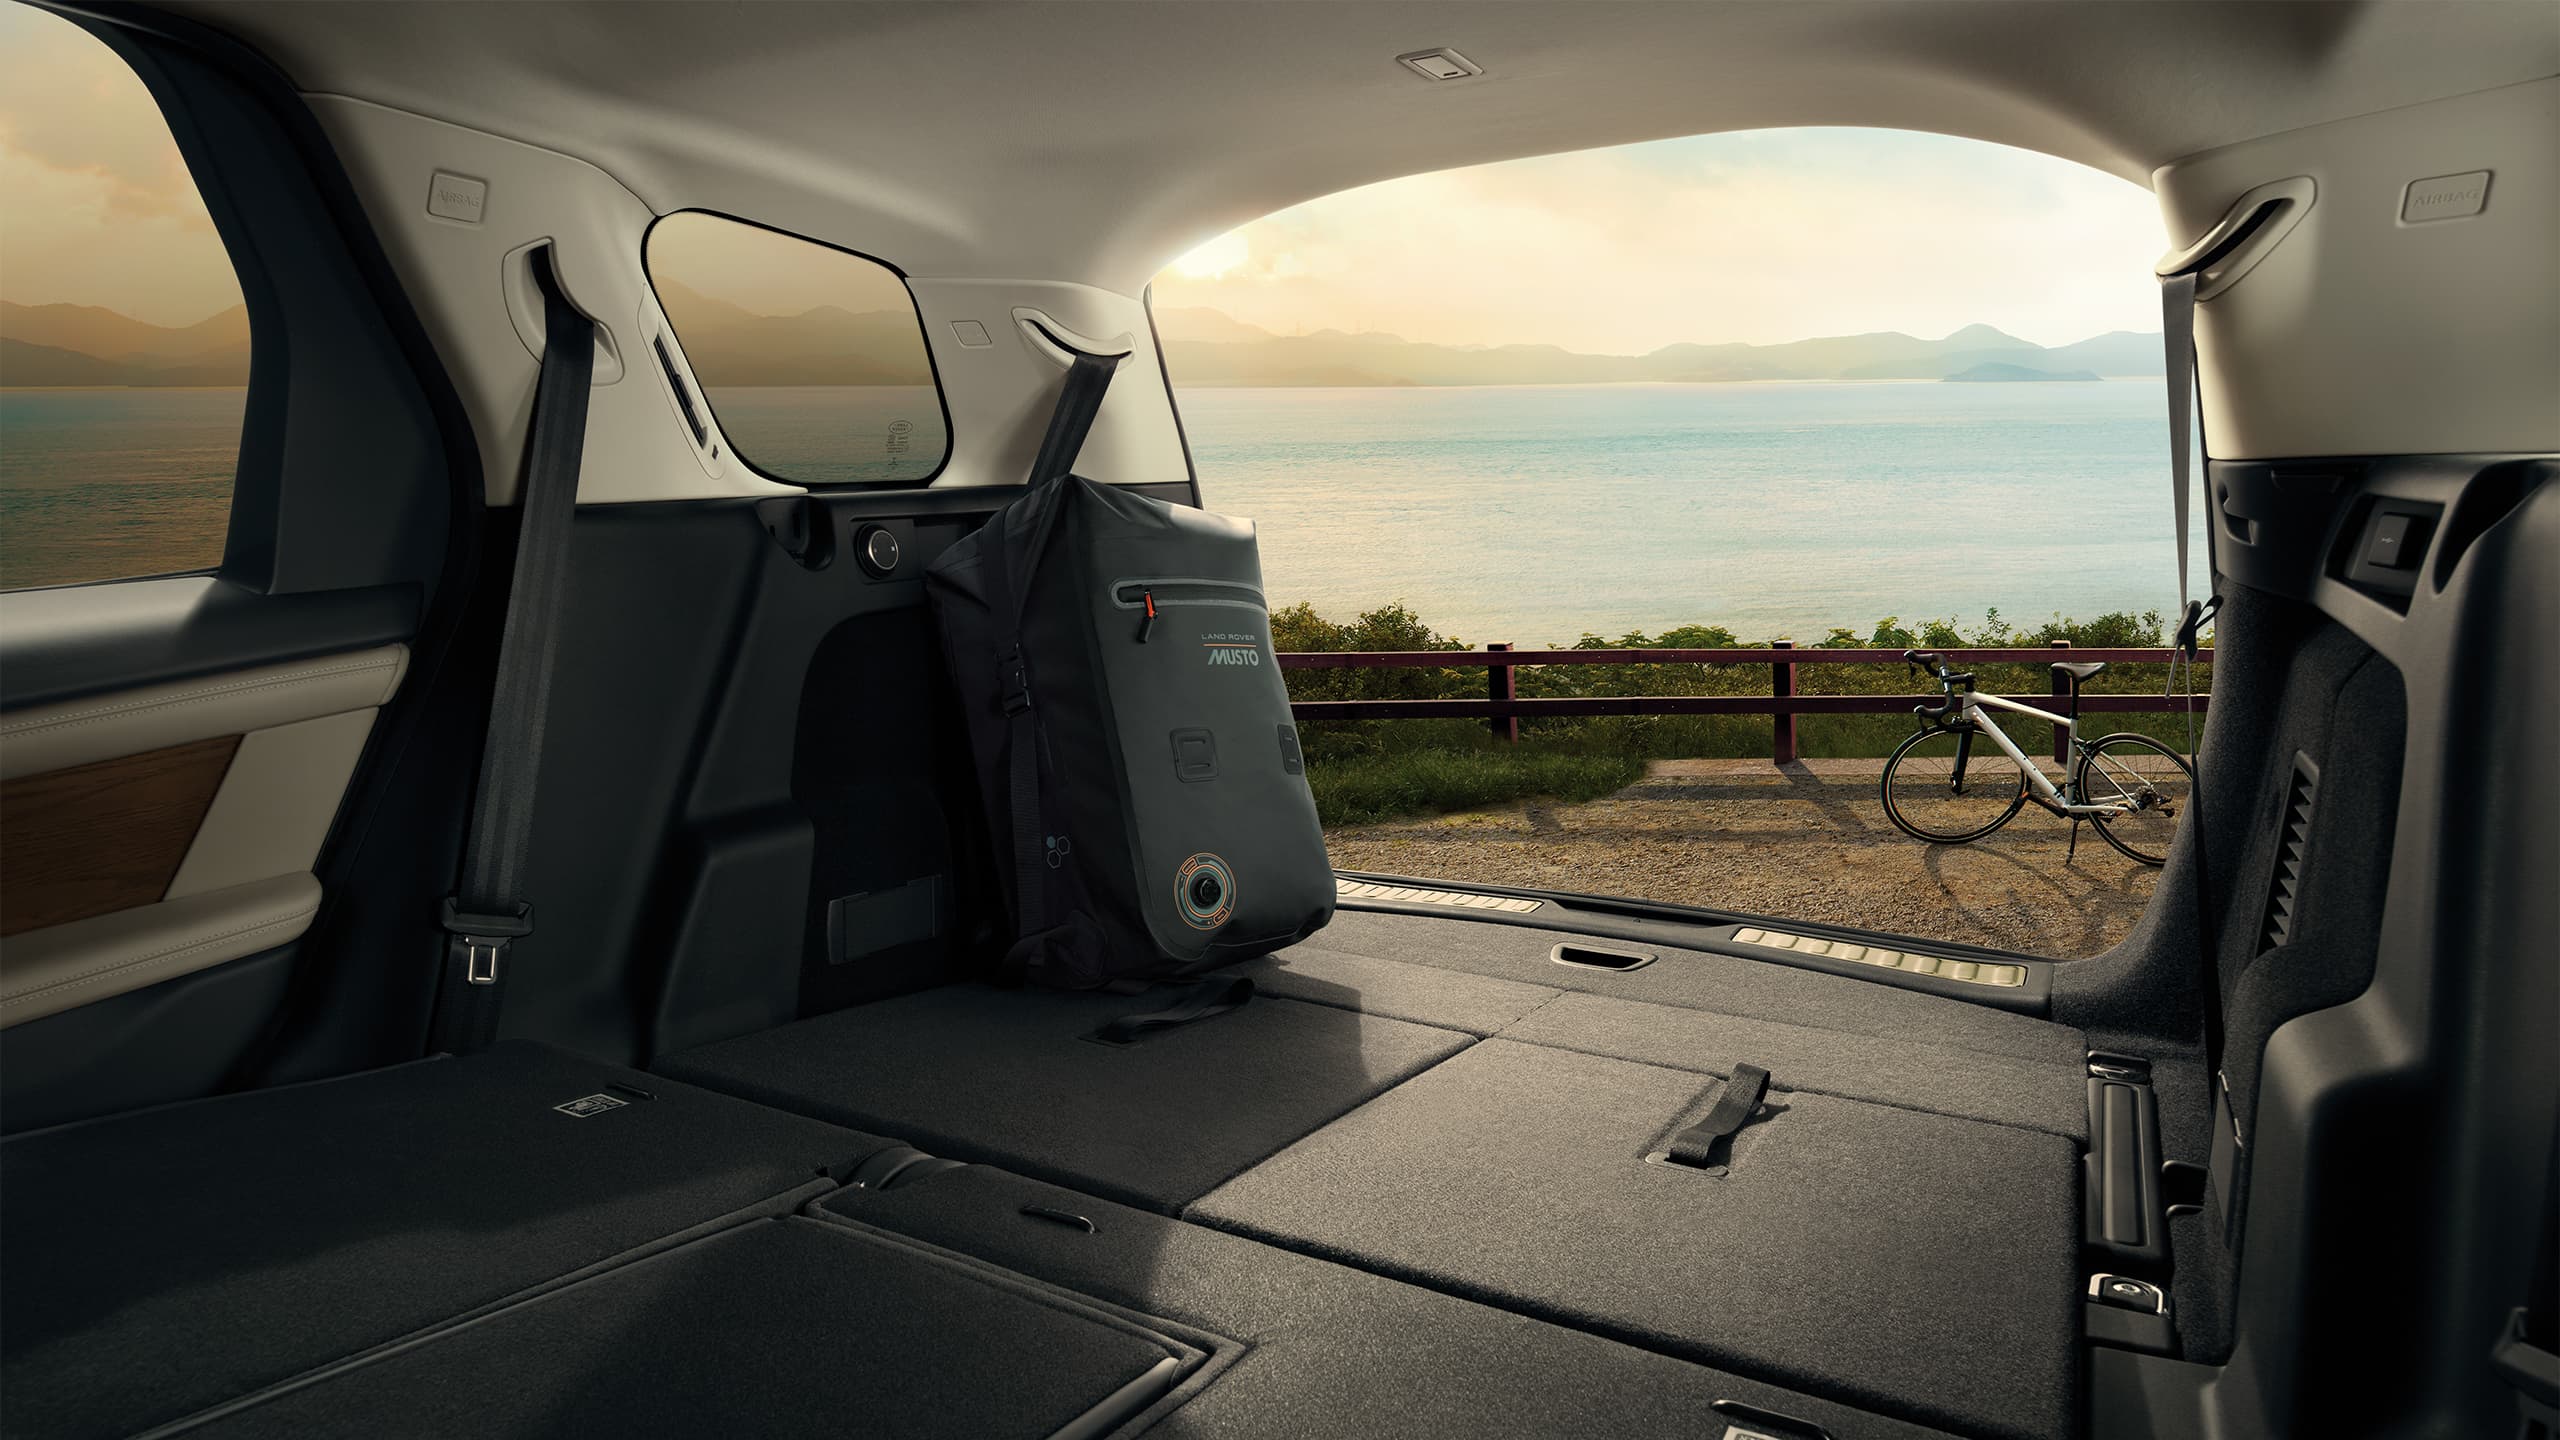 RAY- Land Rover Trunk Space CN